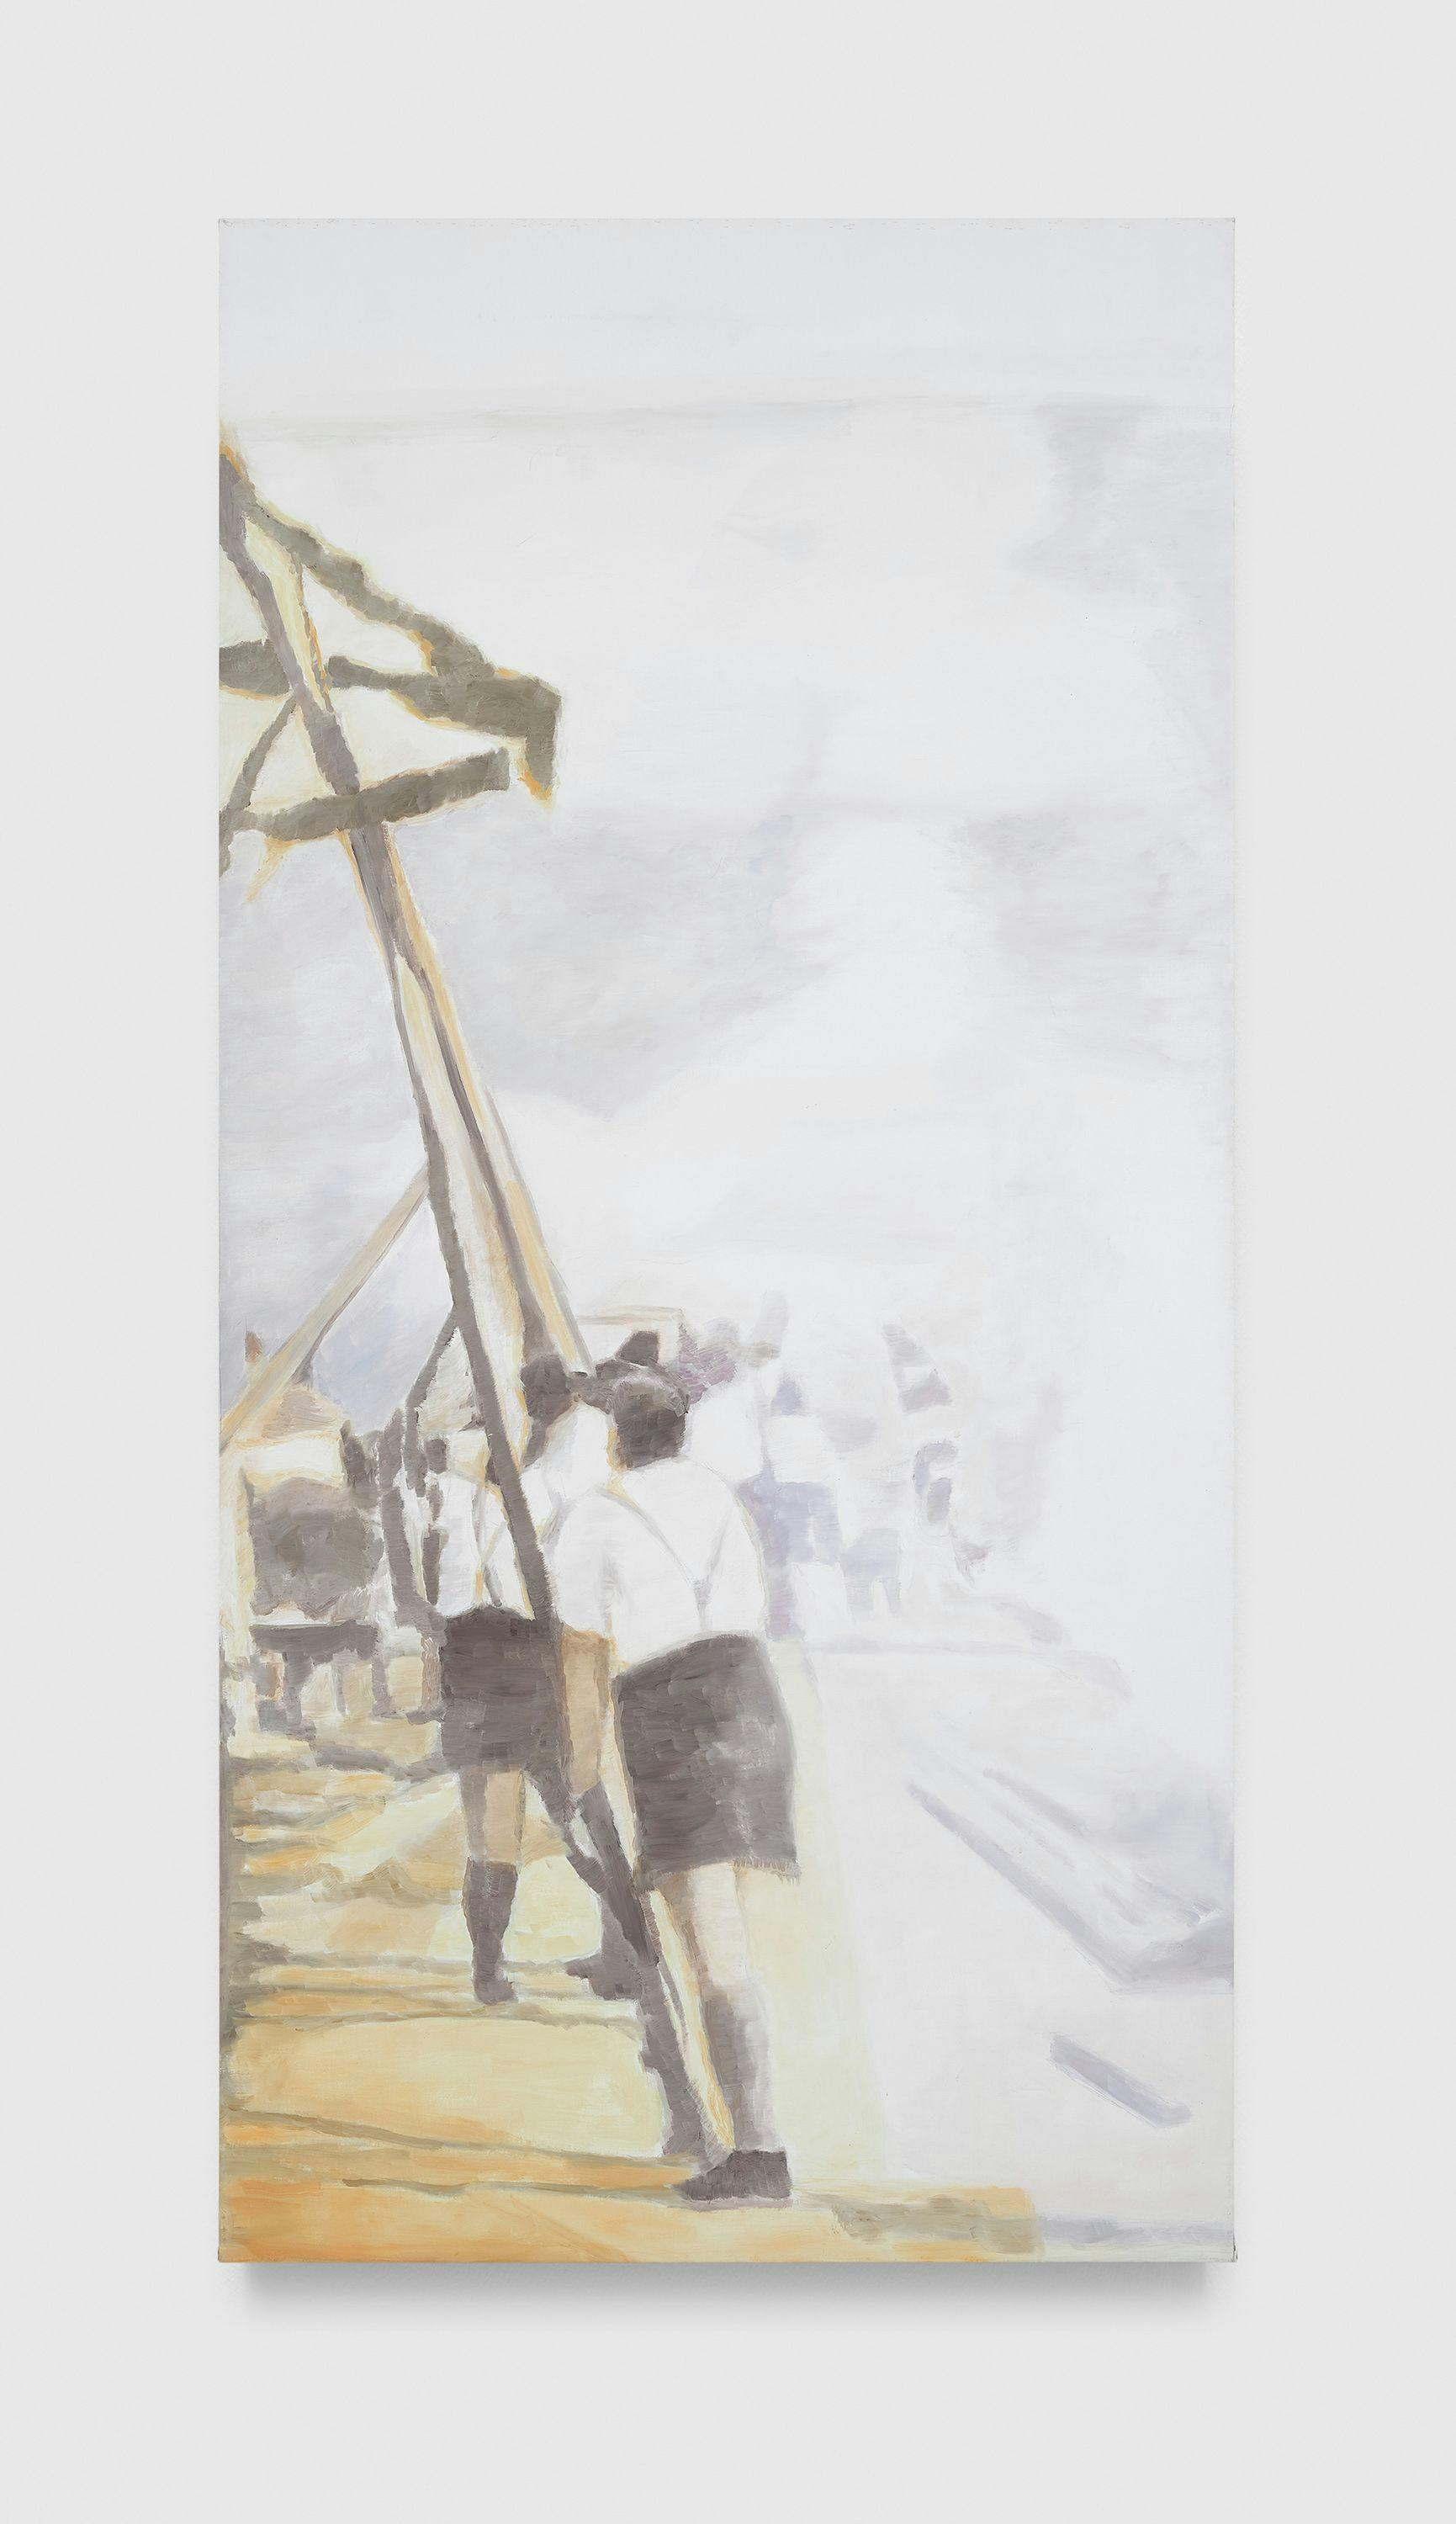 A painting by Luc Tuymans, titled Maypole, dated 2000.